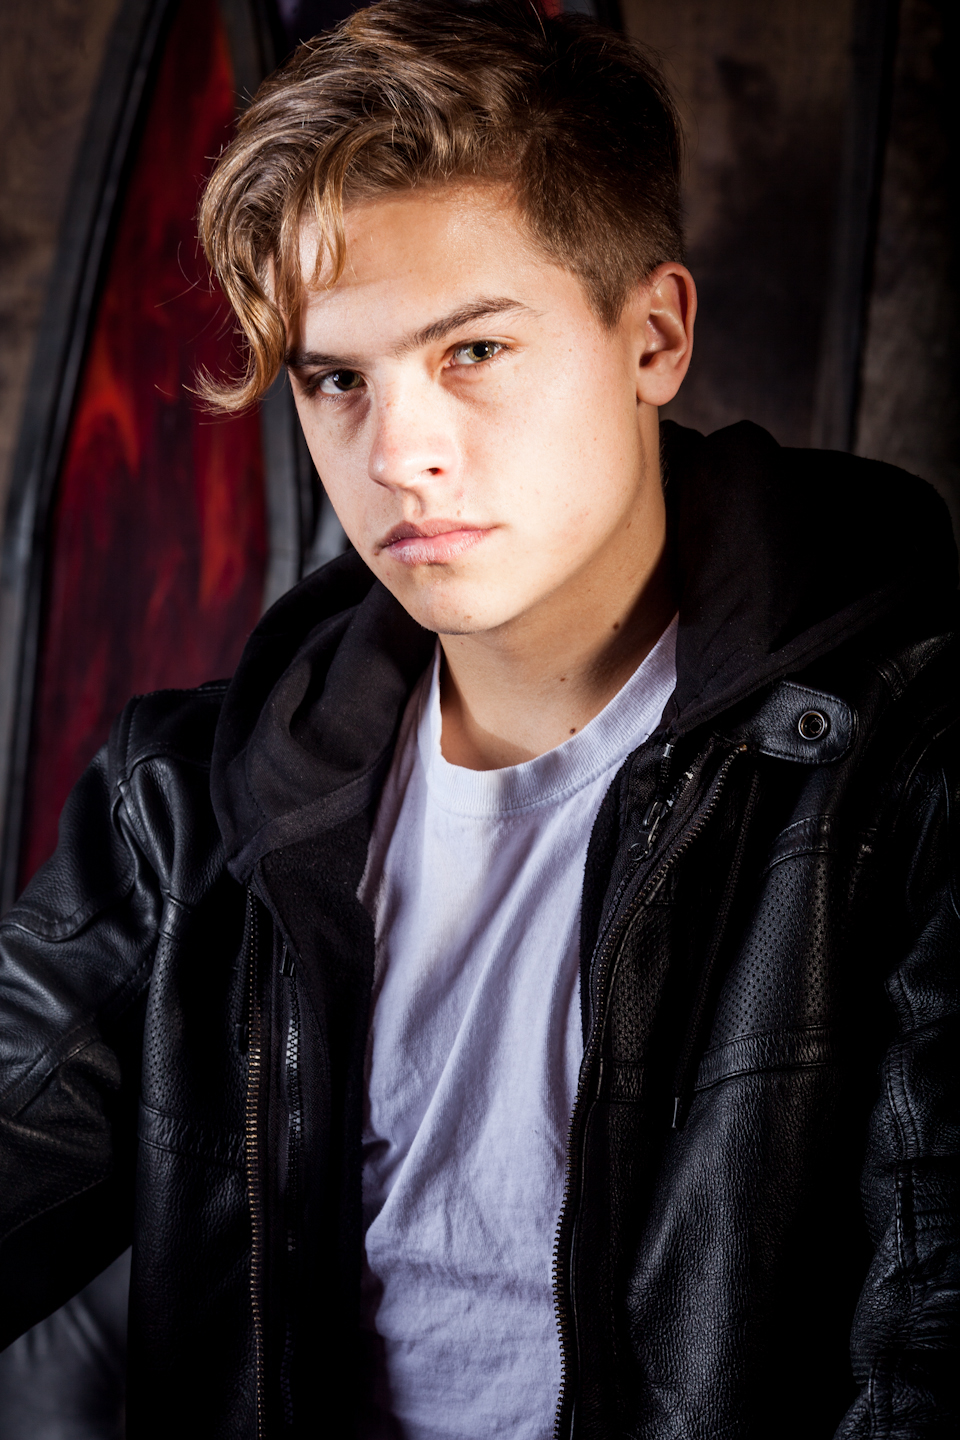 Photoshootdylansprous3 U0026middot - Dylan Sprouse , HD Wallpaper & Backgrounds